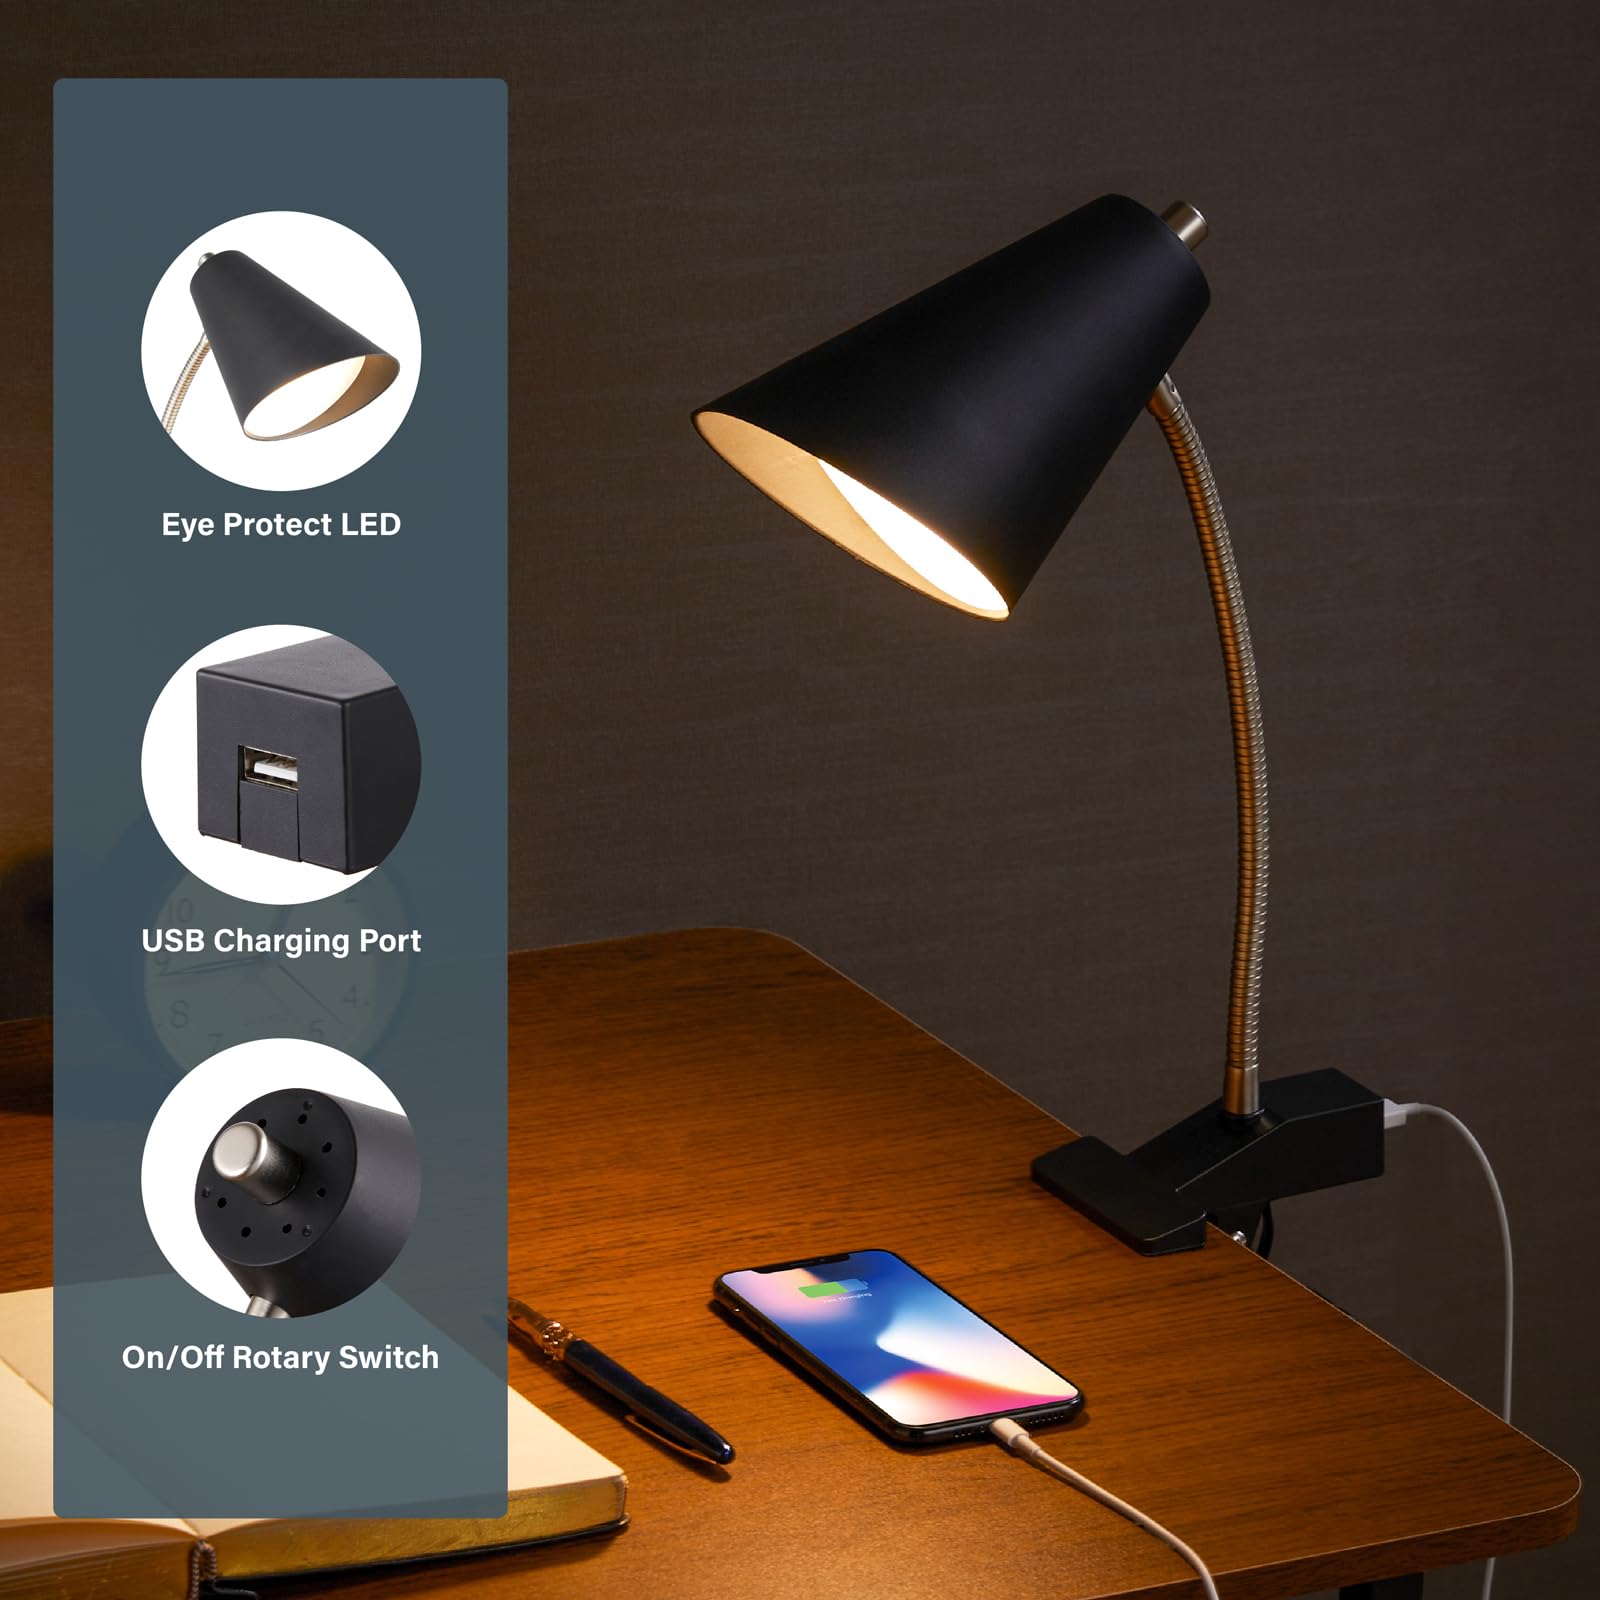 ONEXT LED Clip on Table Lamp with 1 USB Charging Port, Adjustable Neck, On/Off Switch, Modern Desk Lamp for Reading, Working, Studying, Gentle Warm White Light, Eye Protect